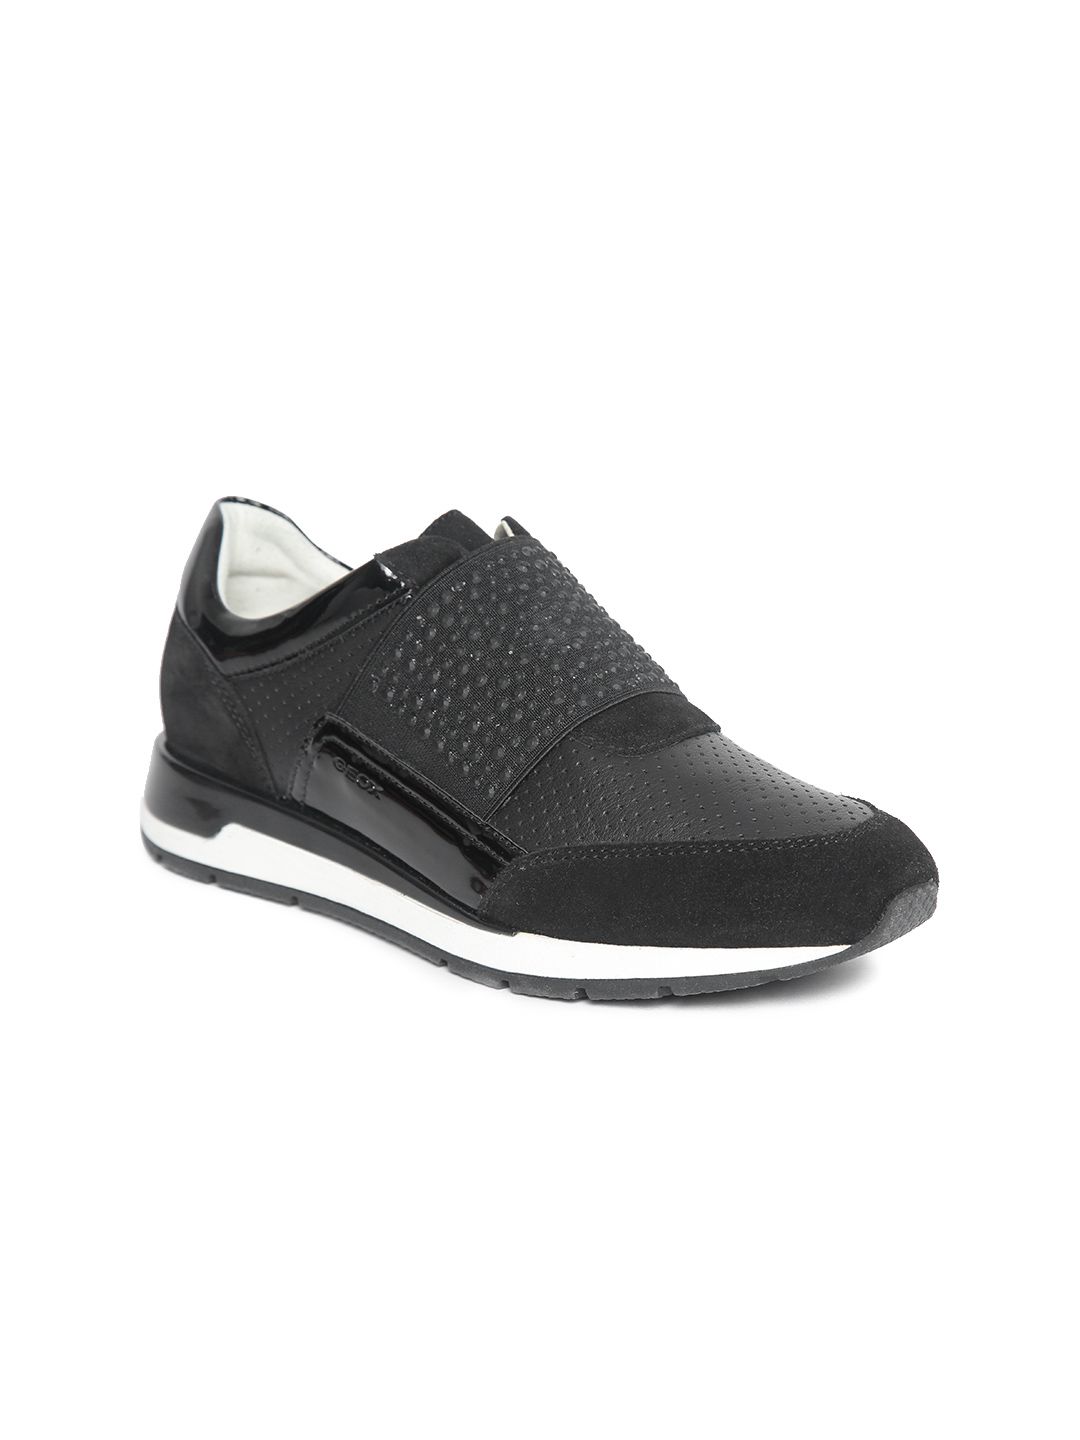 Geox Women Black Leather Perforated Slip-On Sneakers Price in India